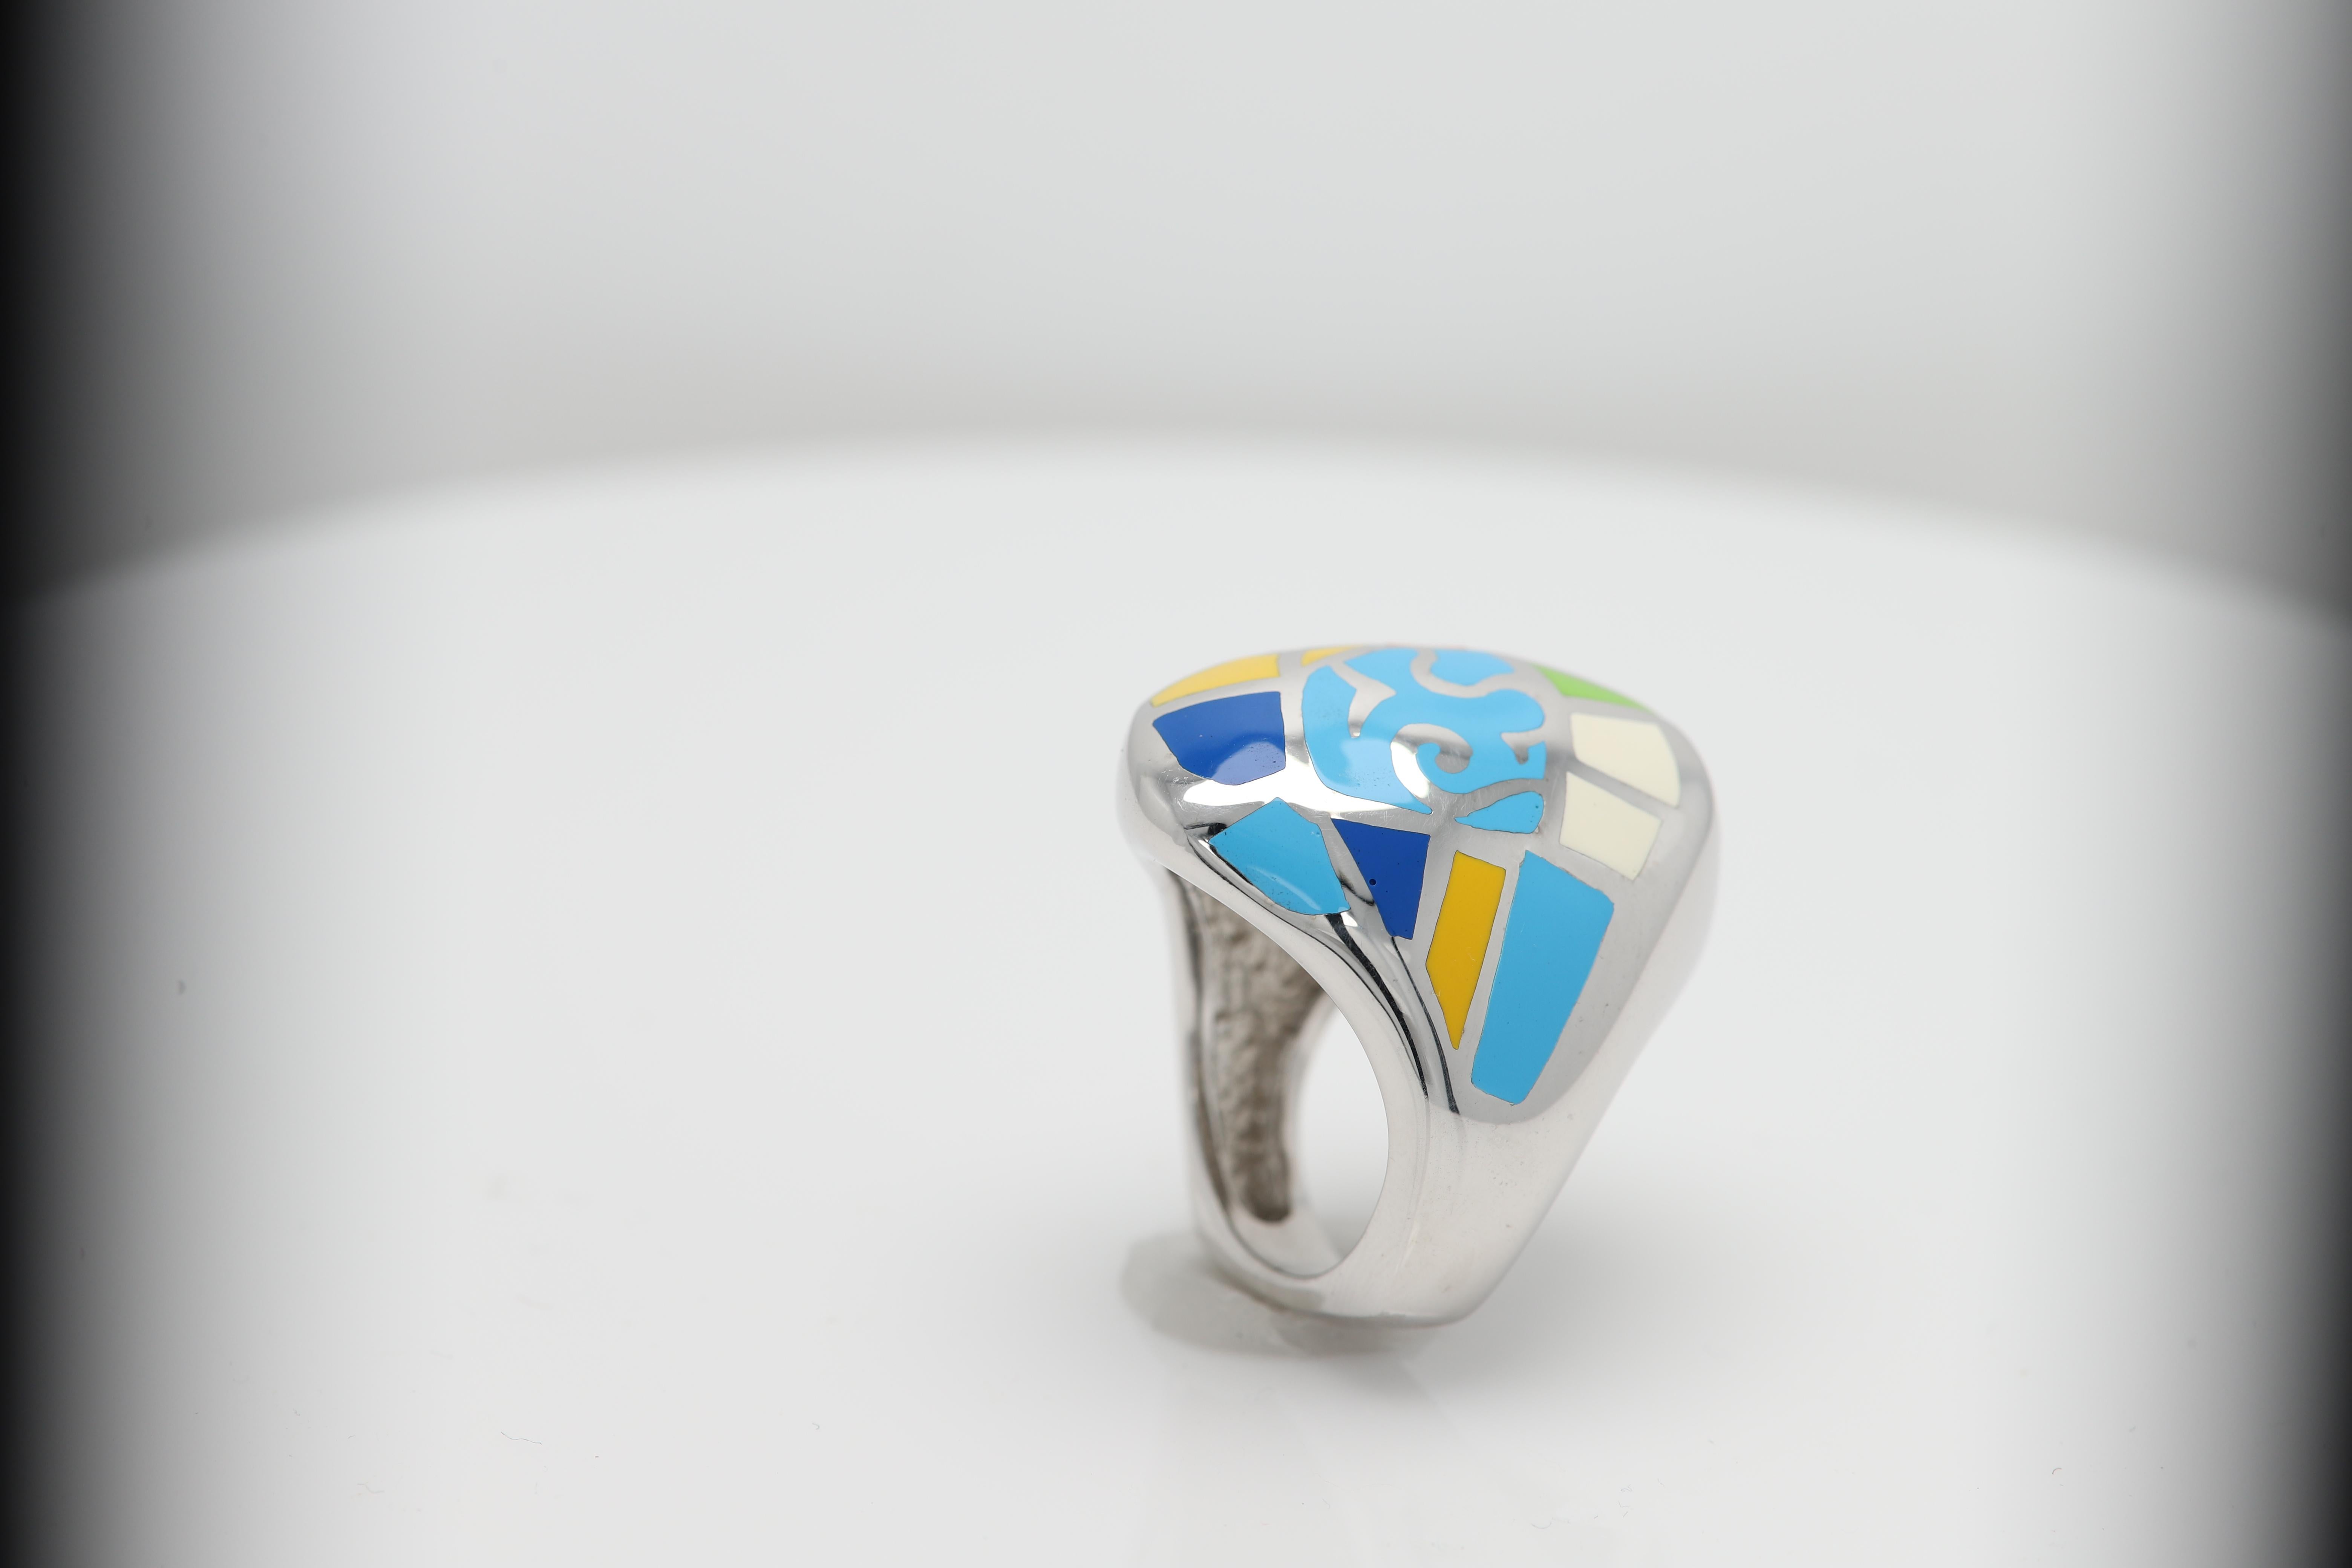 Enamel Artistic Art Ring Inspired by famous world artist sterling silver 925, hand made in Italy, finger size 6.5  (NOT RESIZABLE) please inquire about other sizes. Approx design area size:  30 X 20 mm, Slightly imperfections may exist due to